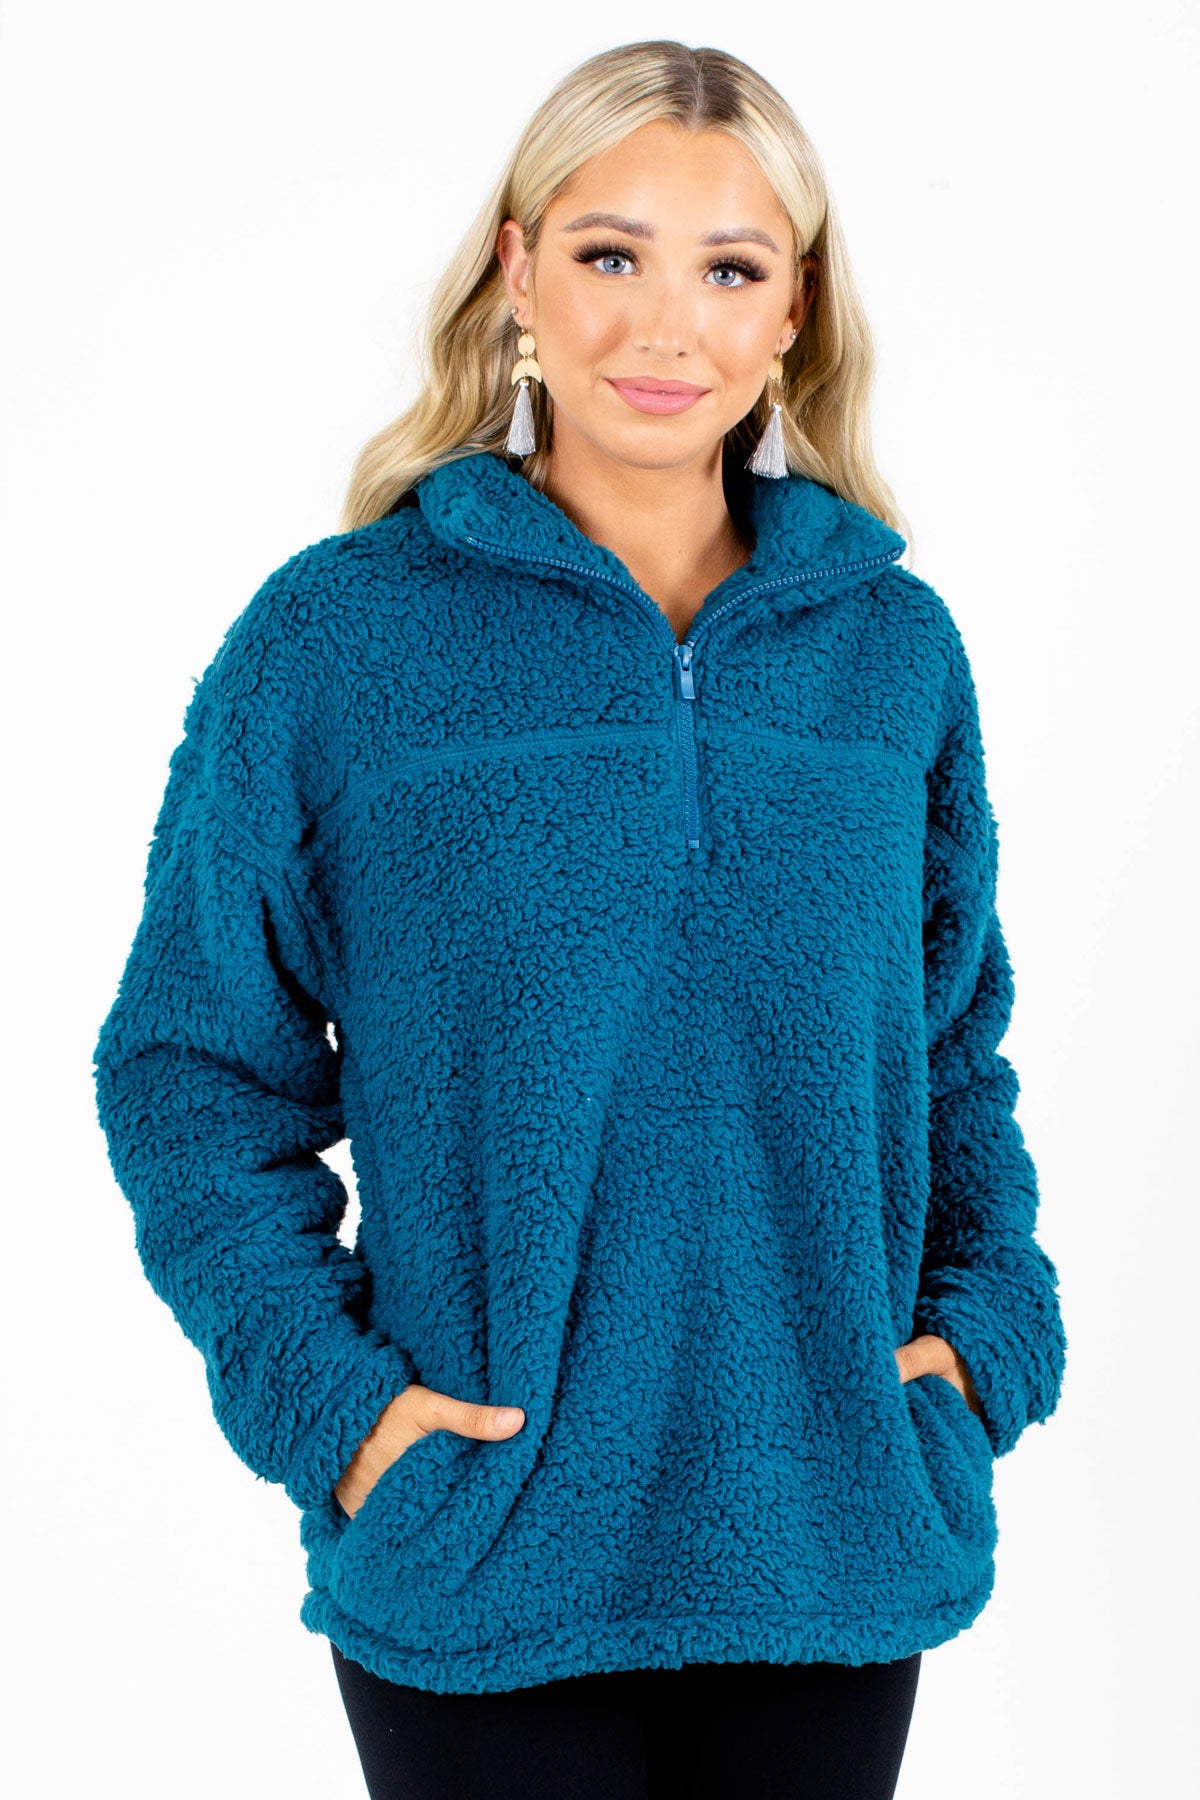 Teal Blue High-Quality Boutique Sherpas for Wome